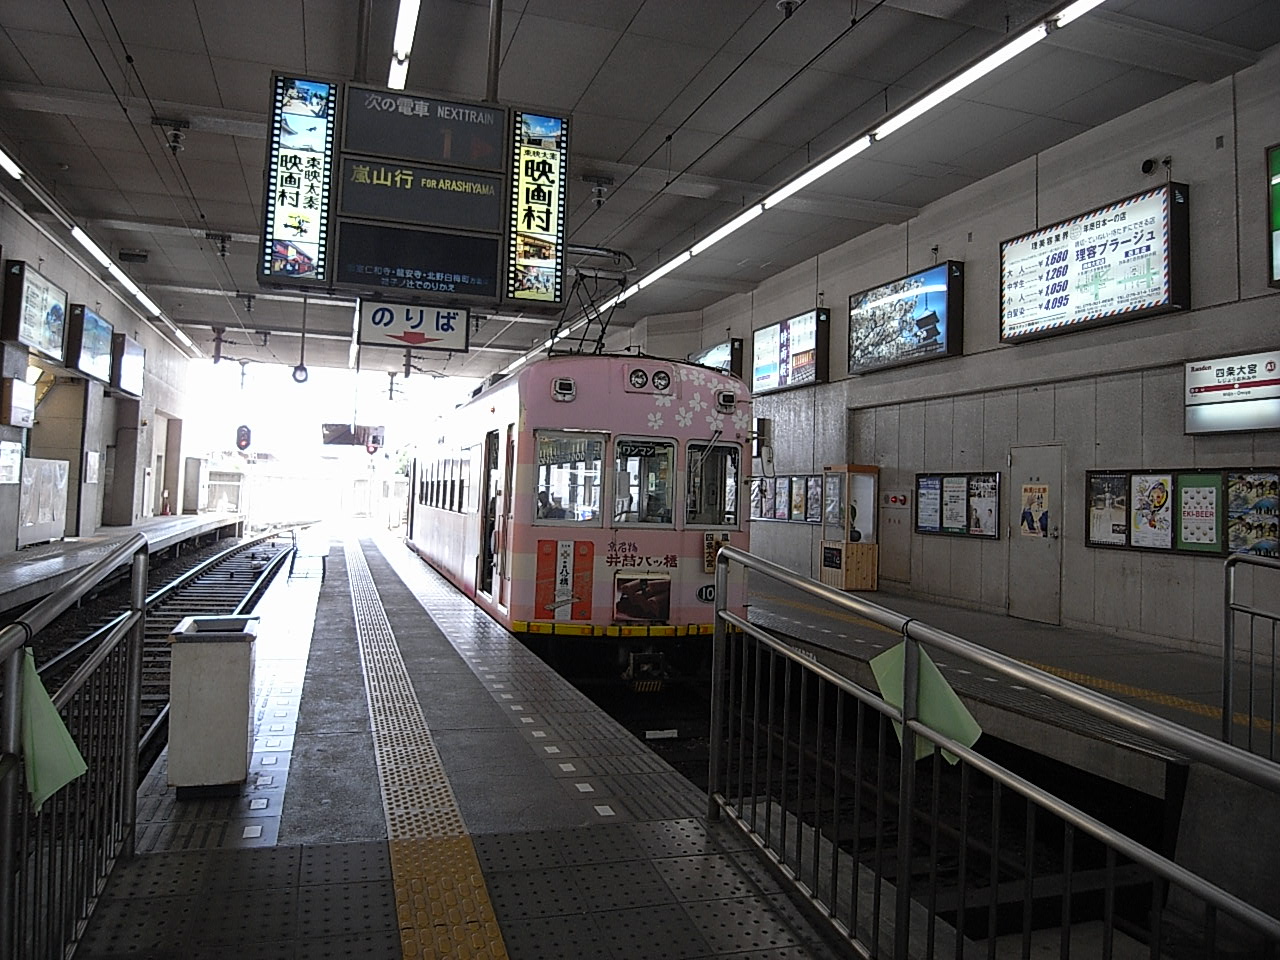 Trains in Kyoto